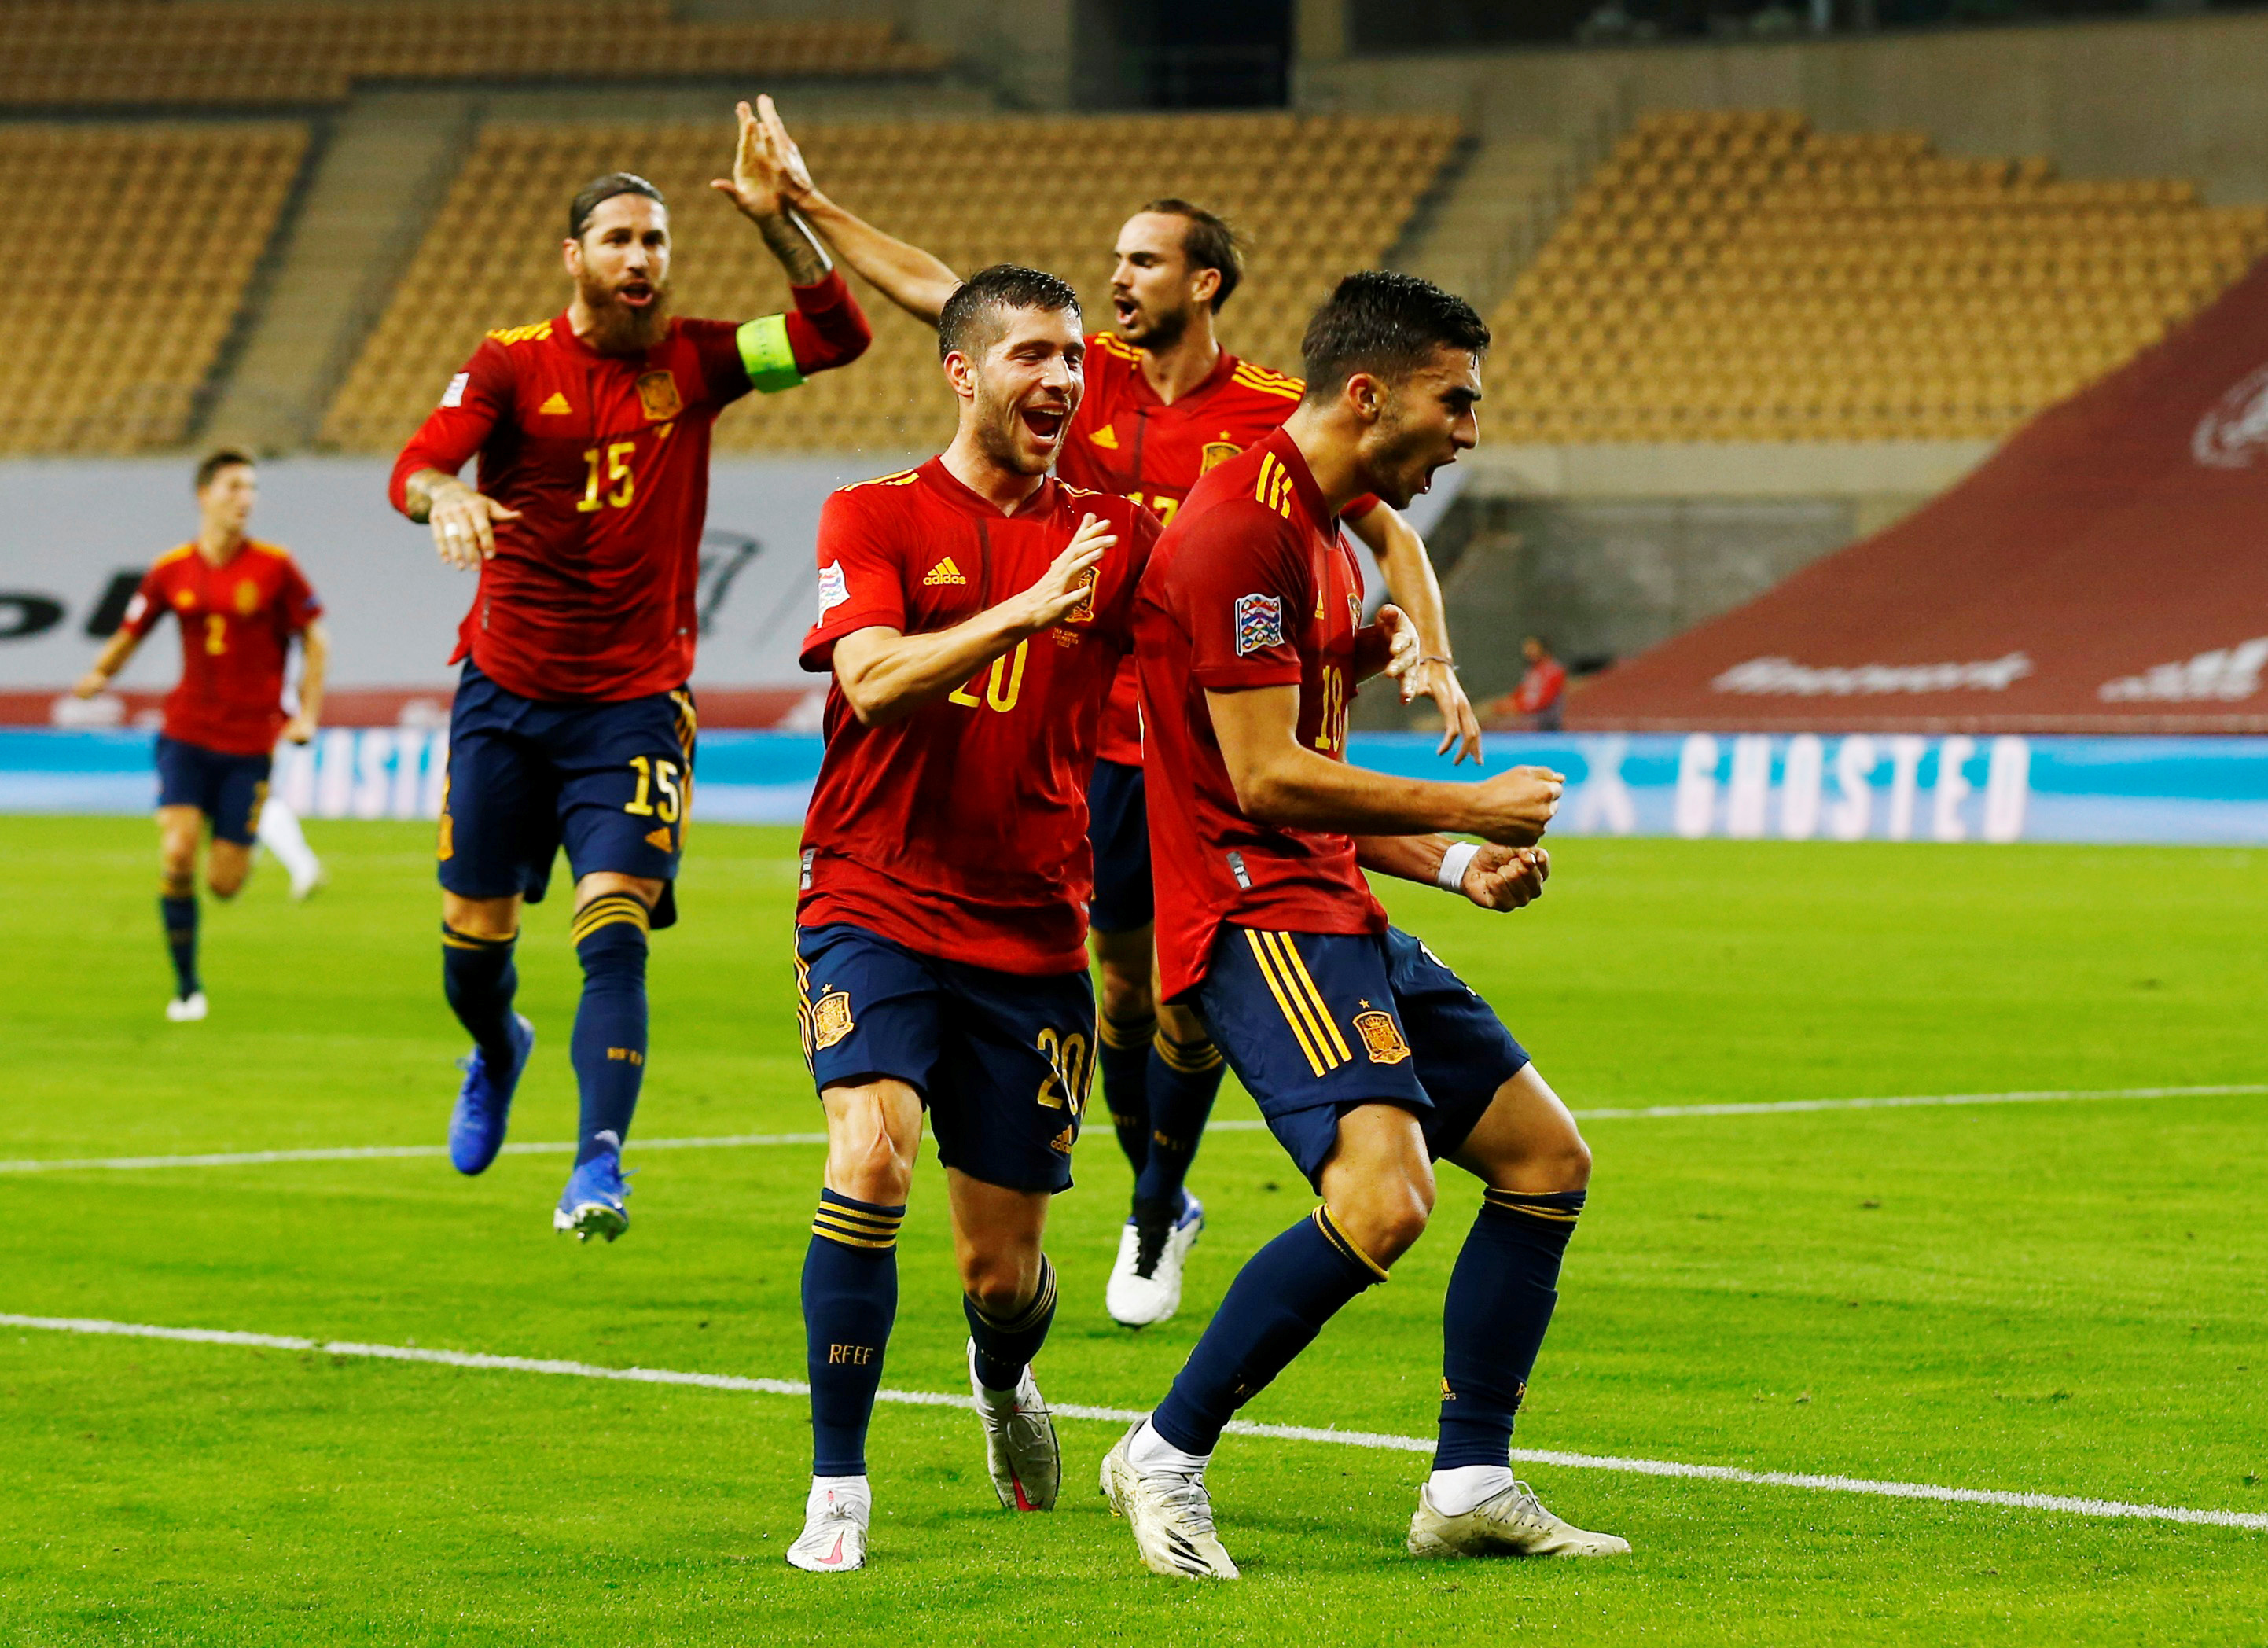 Spain's Ferran Torres celebrates scoring their second goal  during the UEFA Nations League  Group D match between Spain and Germany, at Estadio La Cartuja, in Seville, Spain, on  November 17, 2020. Photo: Reuters